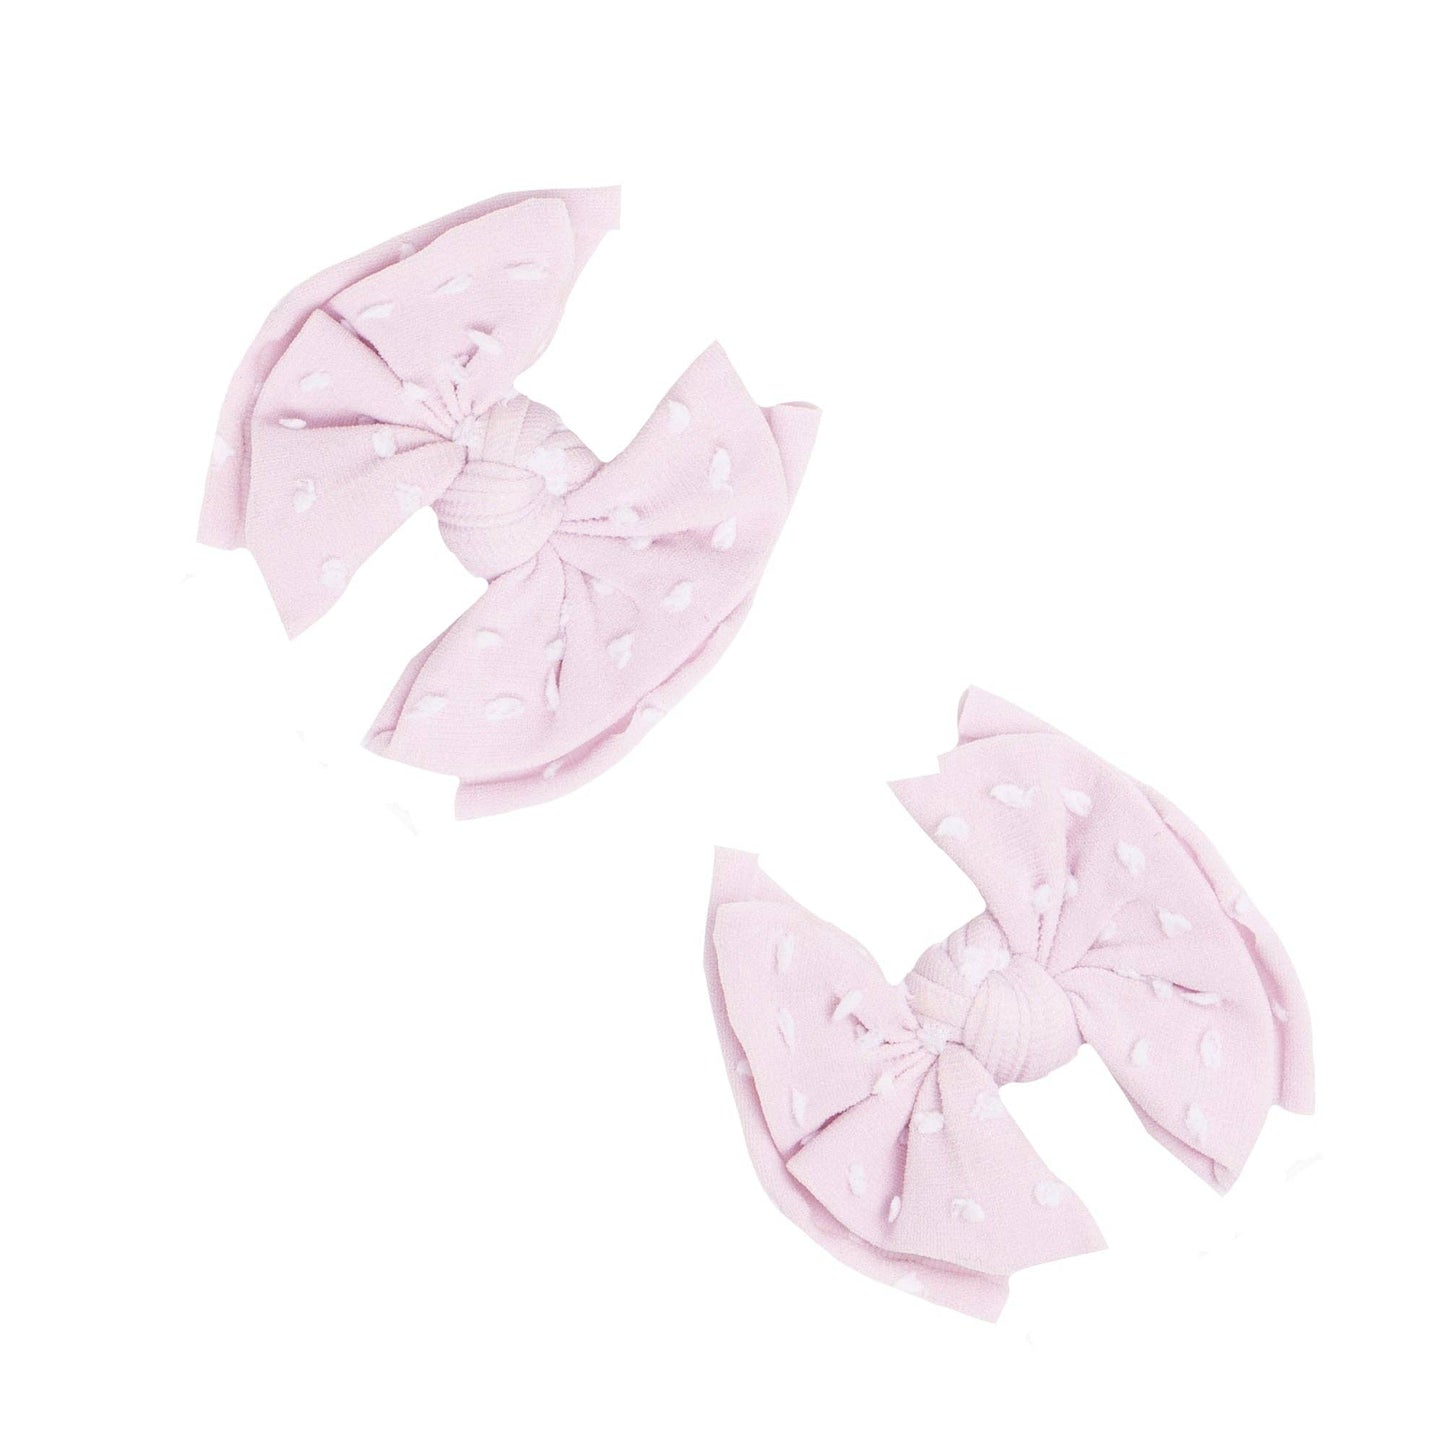 Baby Bling Bows - 2PK BABY SHAB CLIPS: thistle dot